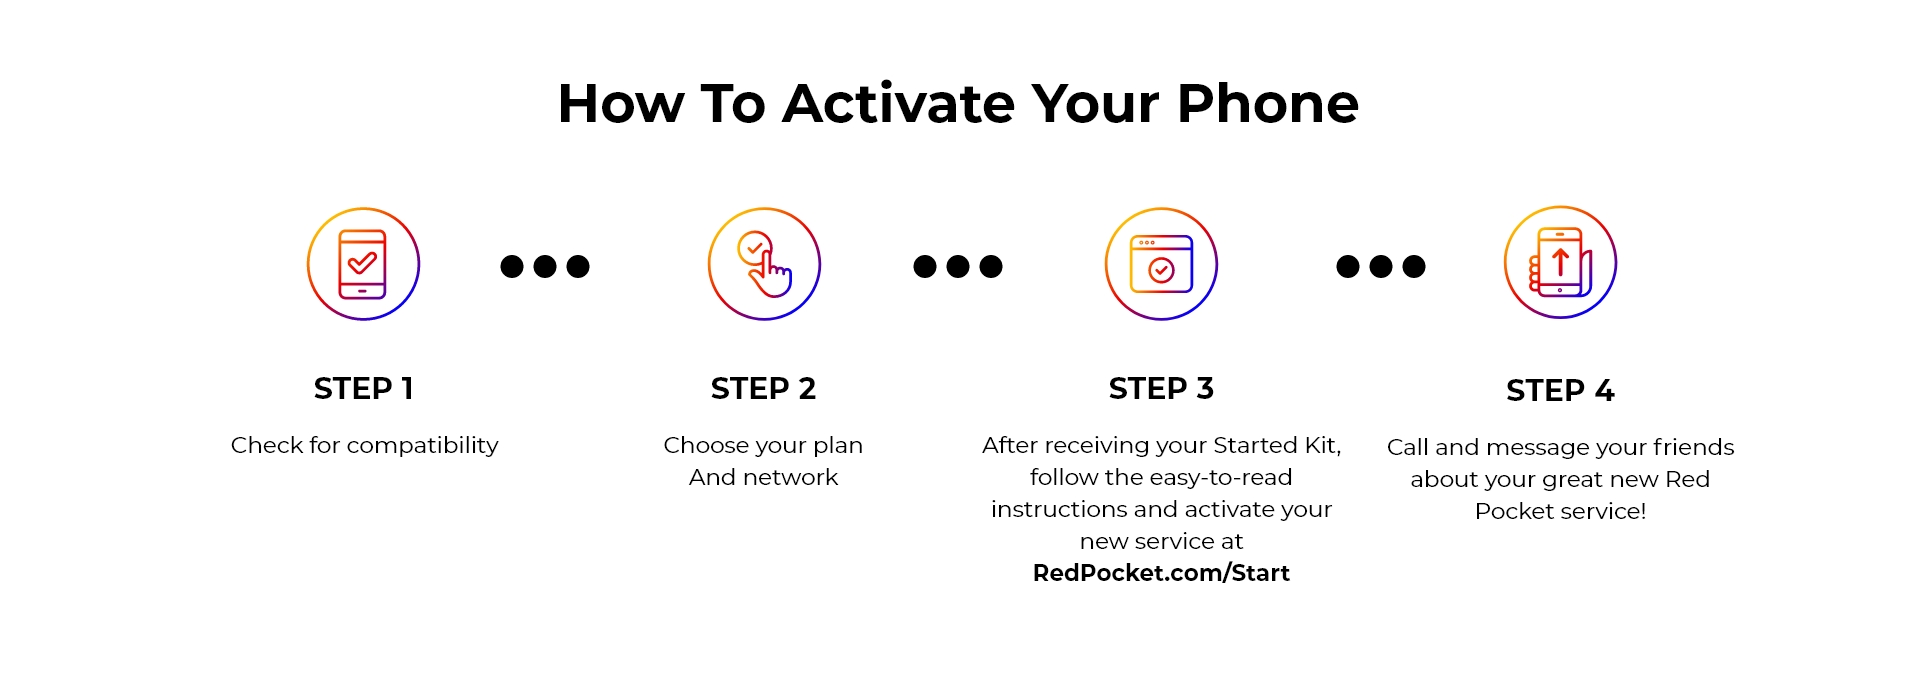 Red Pocket Mobile four step activation process